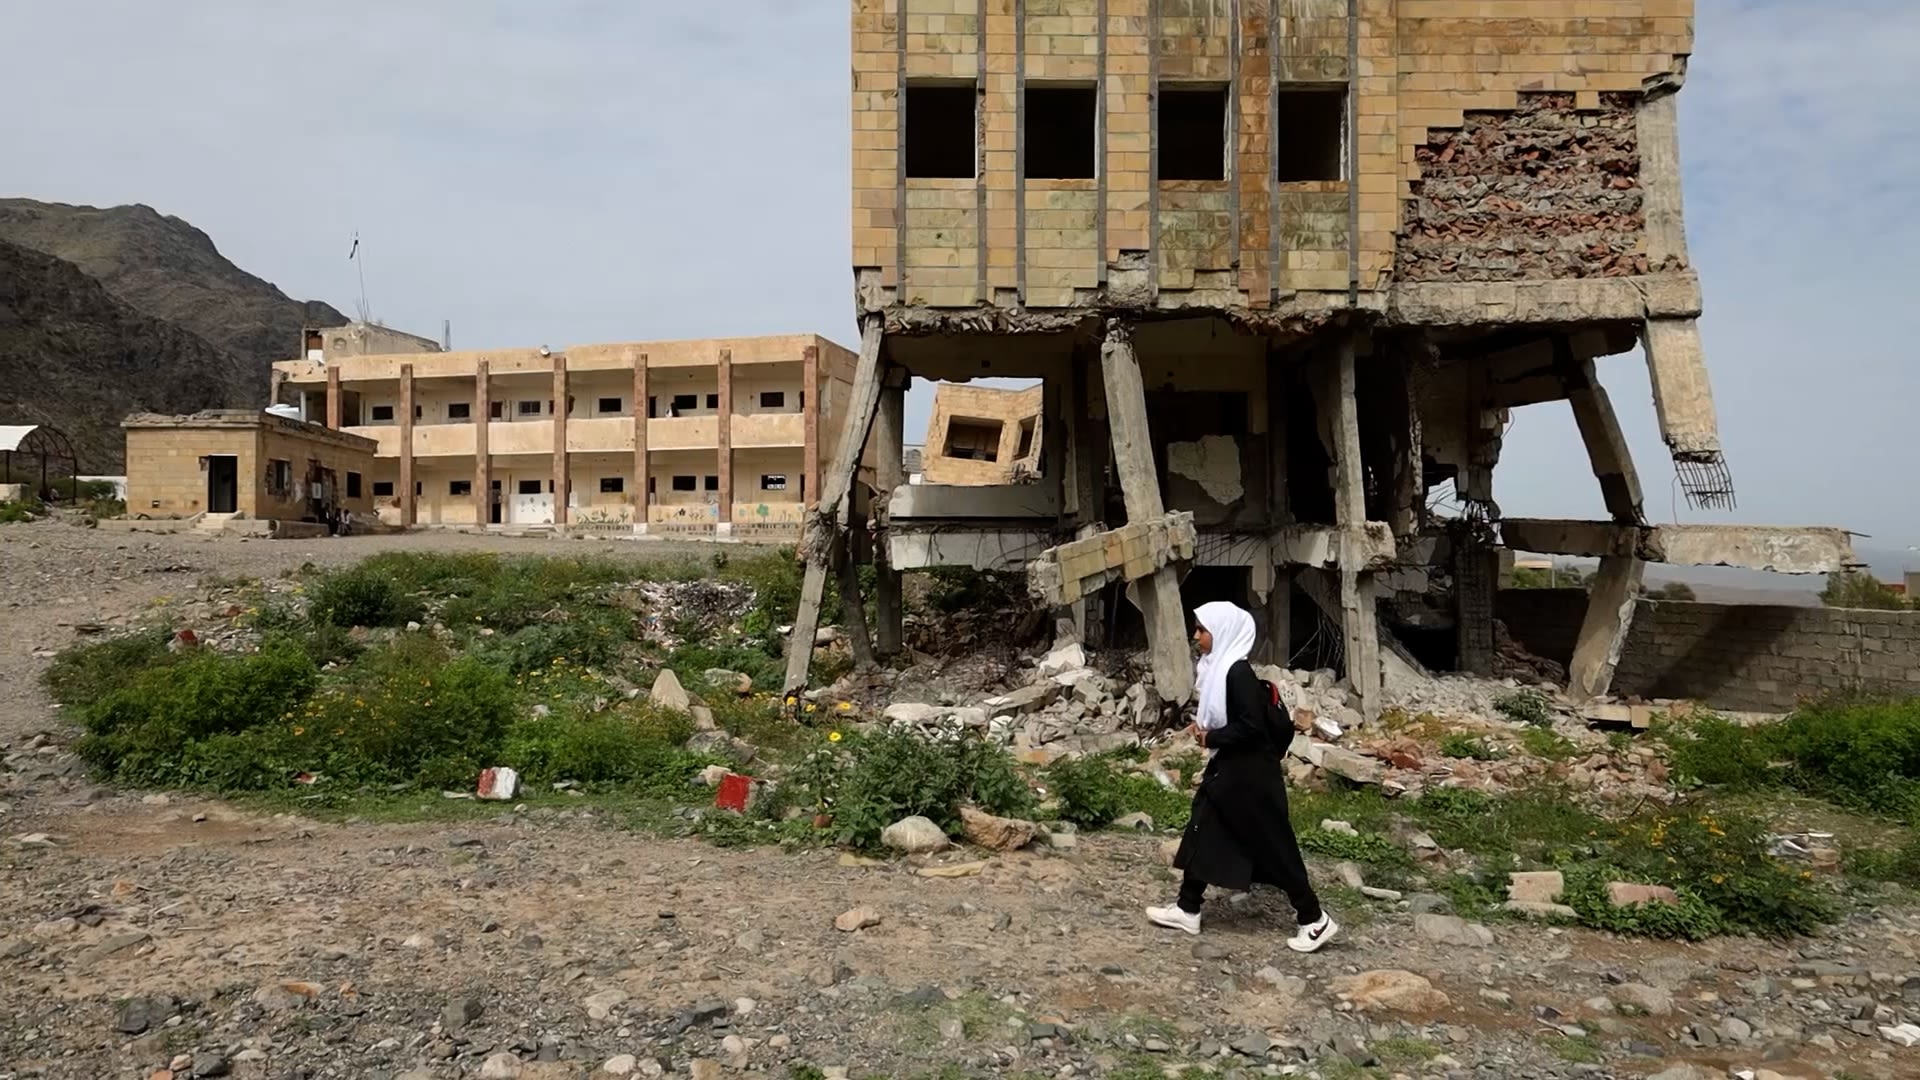 Lina*, 12, walks around the grounds of her semi-destroyed school that's contaminated with landmines in Taiz, Yemen. She wears a white headscarf and the building immediately behind her is shown partly destroyed. A safer, more complete school building is shown in the background.